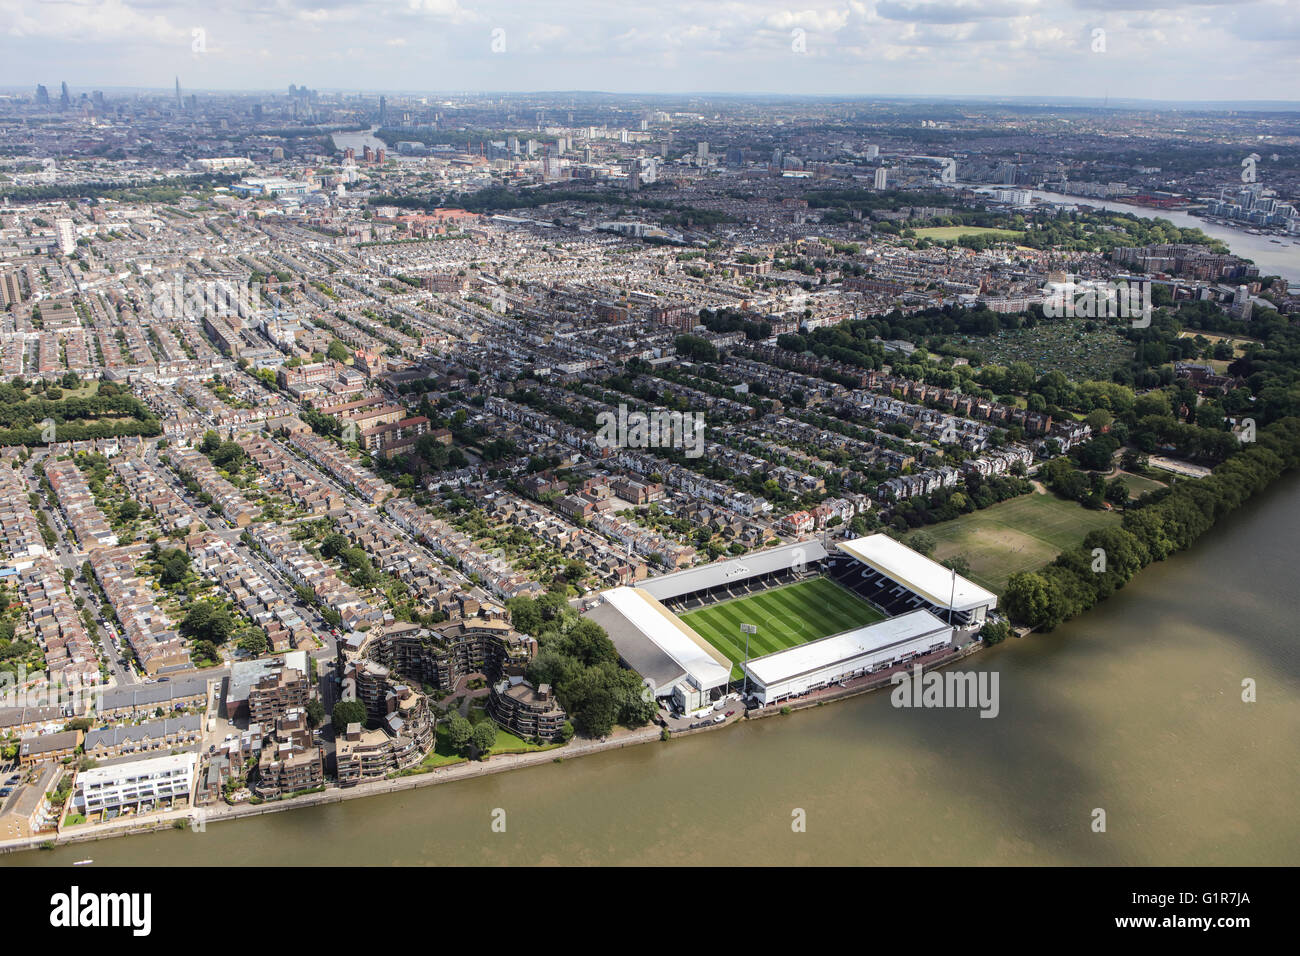 An aerial view of Craven Cottage, home of Fulham Football Club Stock Photo